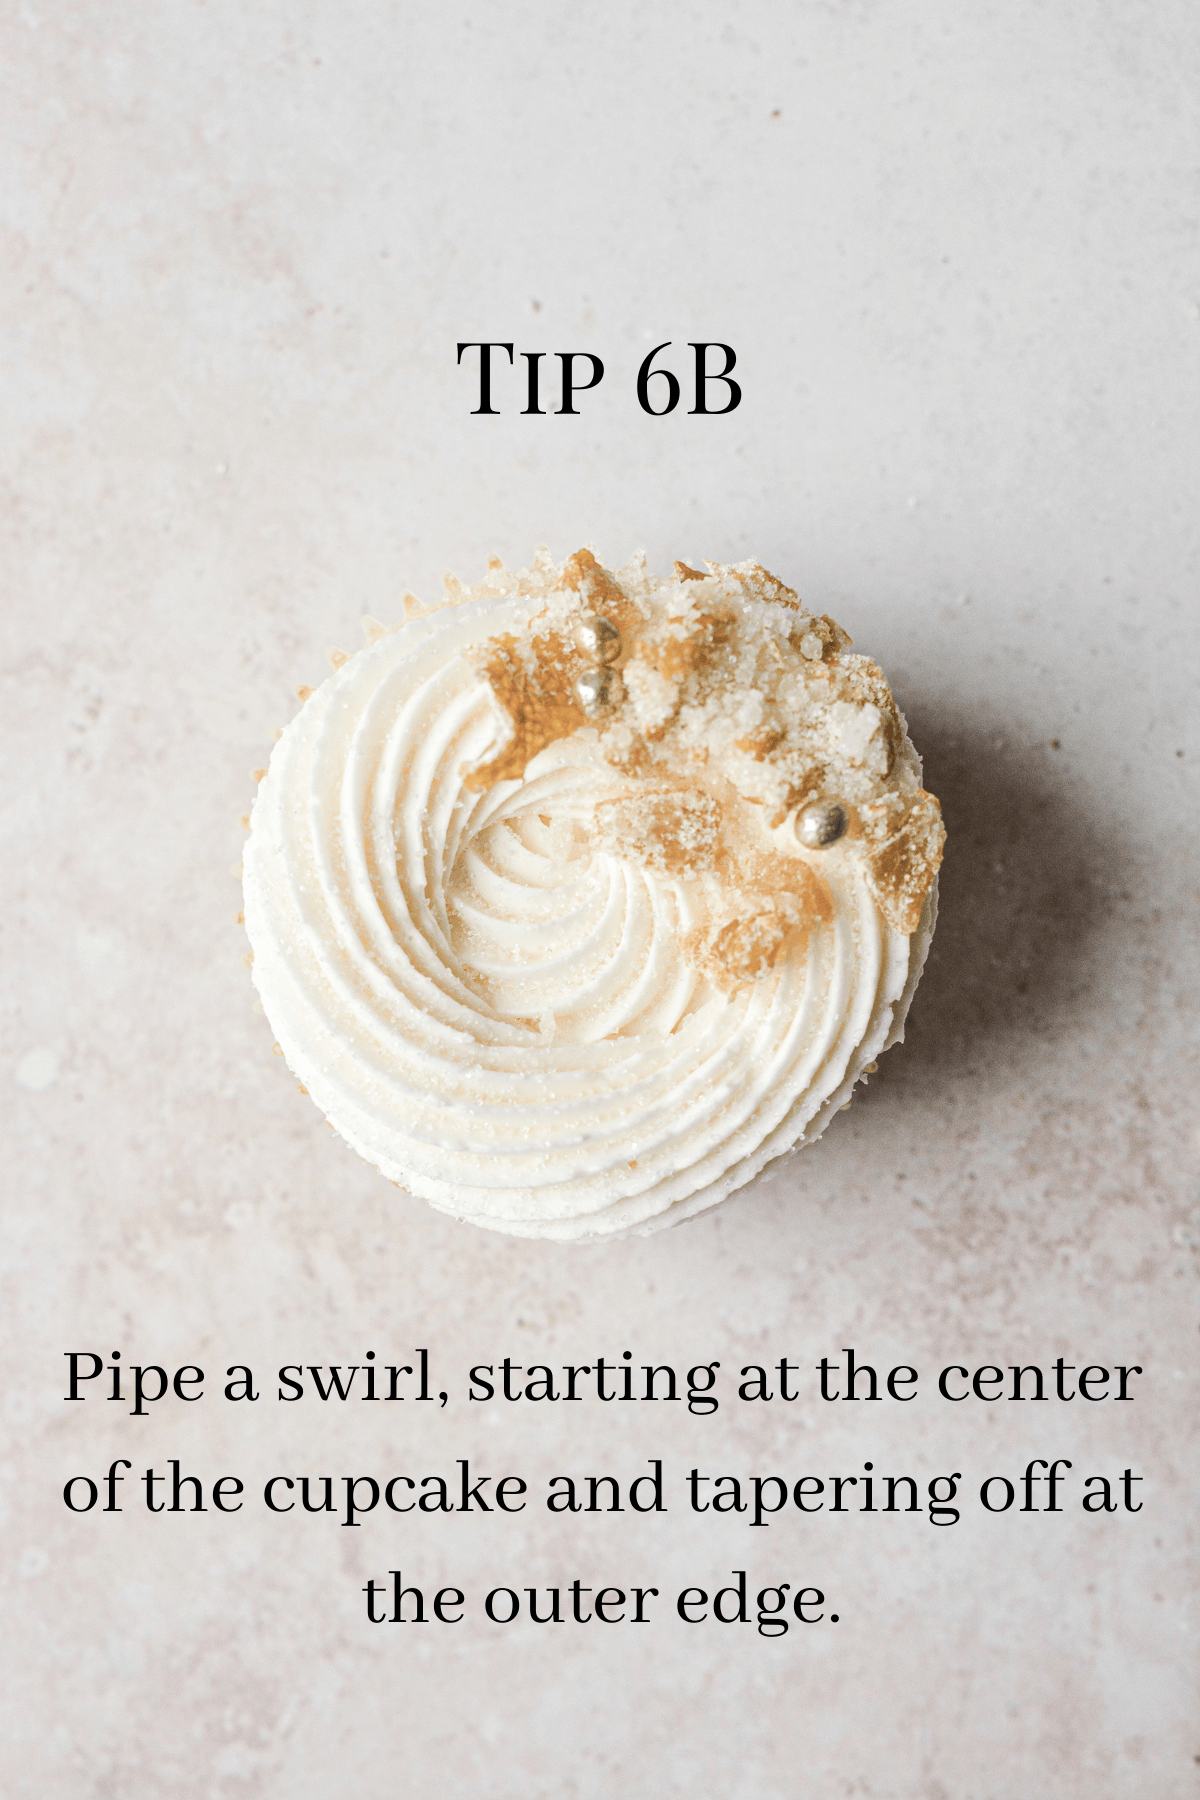 A graphic showing how to use tip 6B to pipe buttercream onto a lemon cupcake.